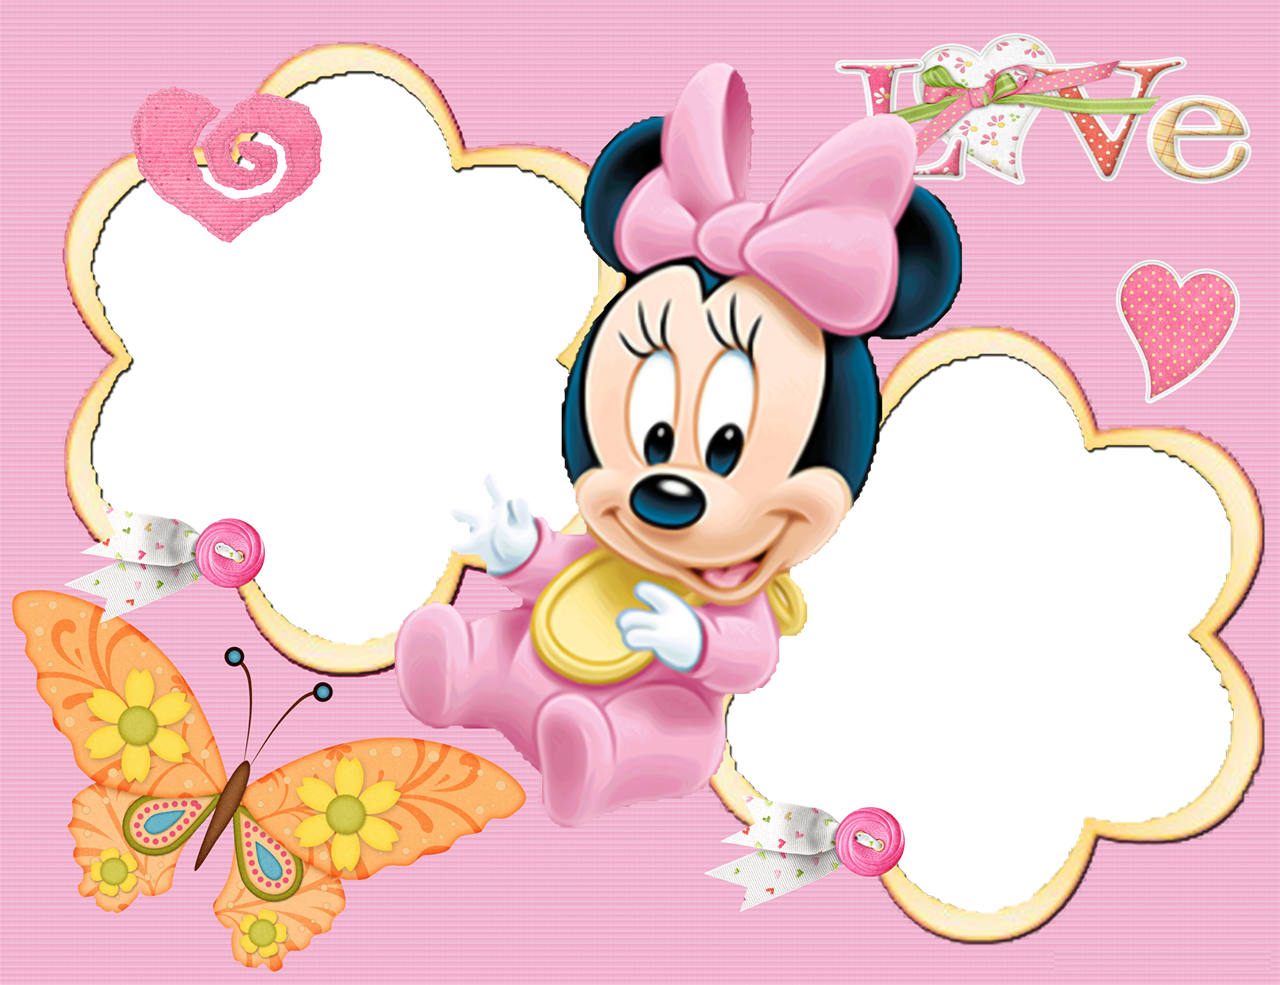 Download Mickey Mouse Party Digital Clipart Minnie Mouse Clubhouse Disney Baby Minnie Mouse Edible Image Cake Toppers Png Image With No Background Pngkey Com